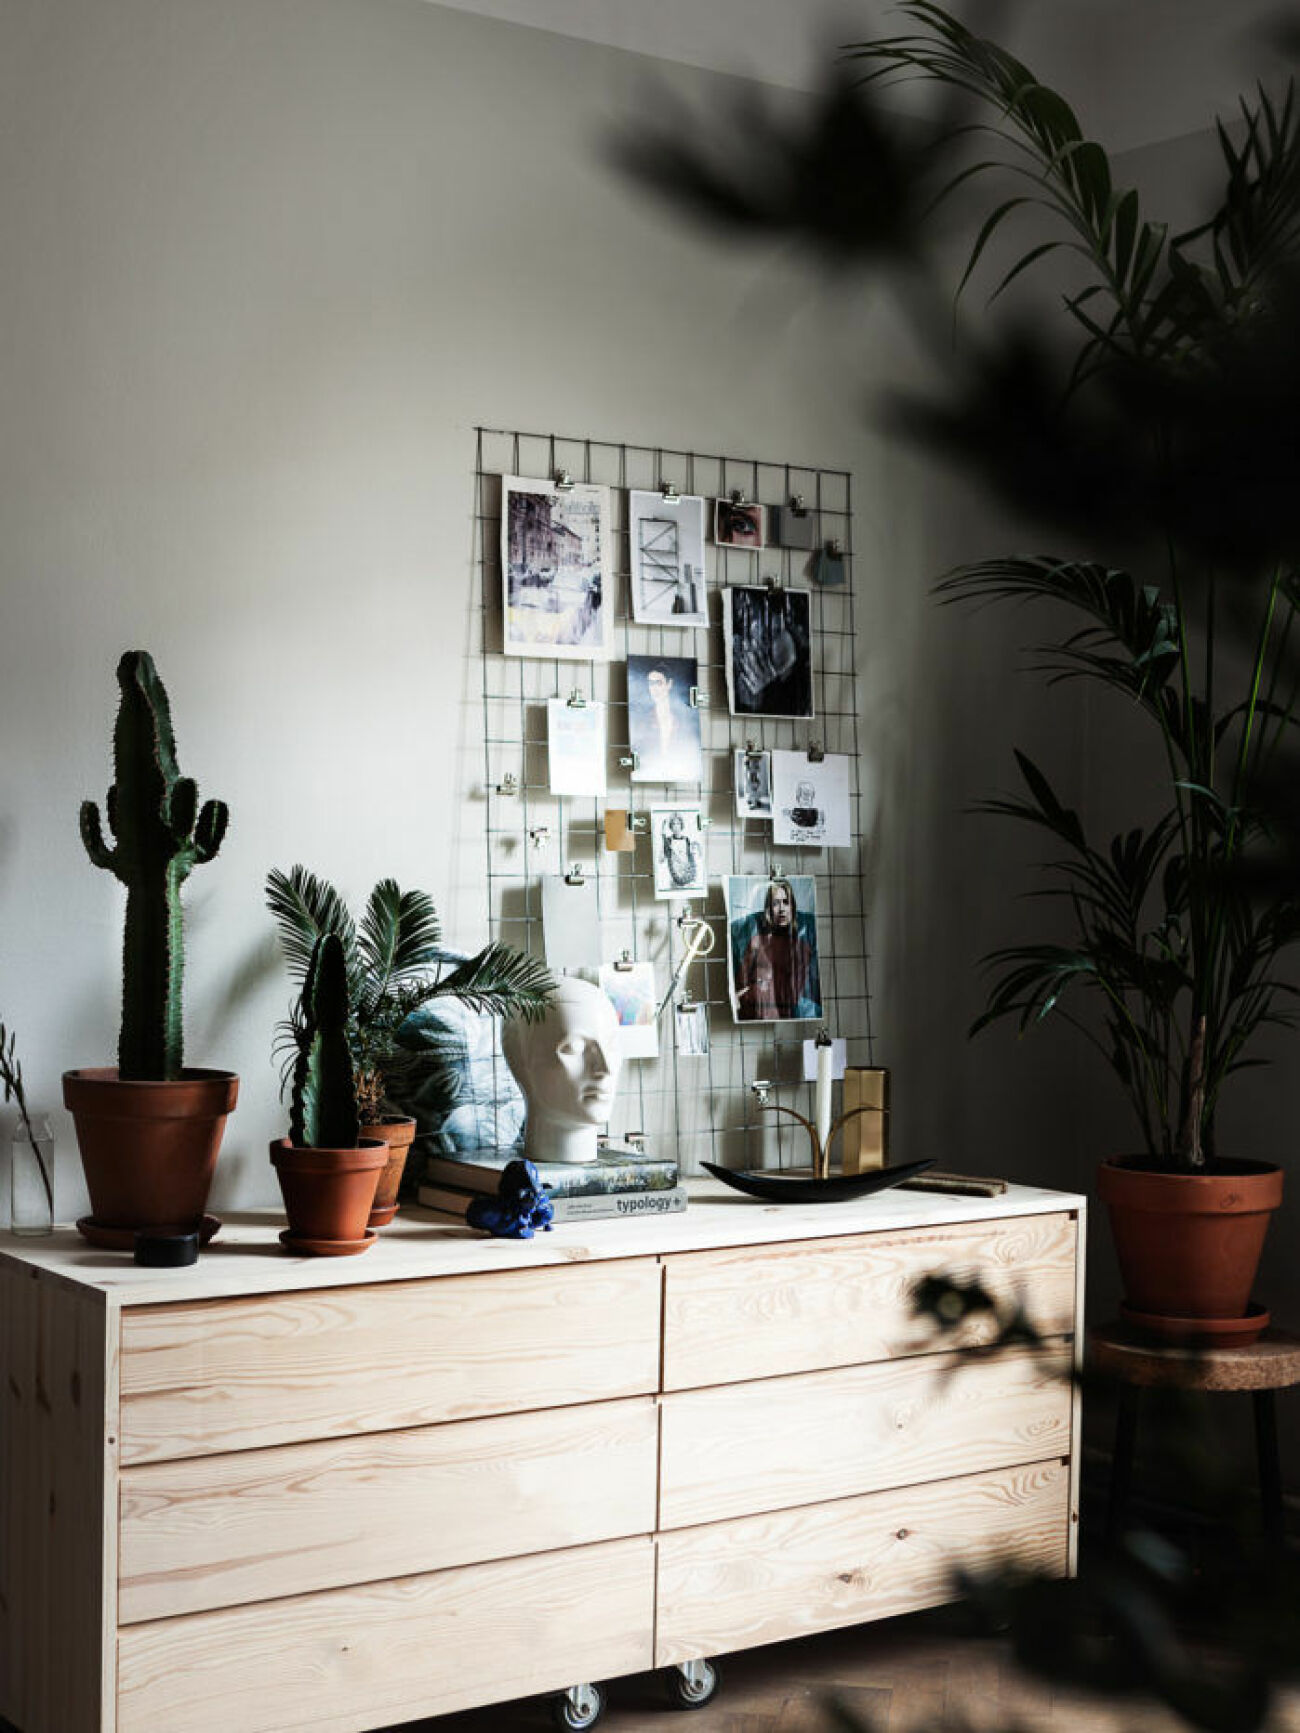 Scandinavian decoration and ideas. Wooden furniture and plants.